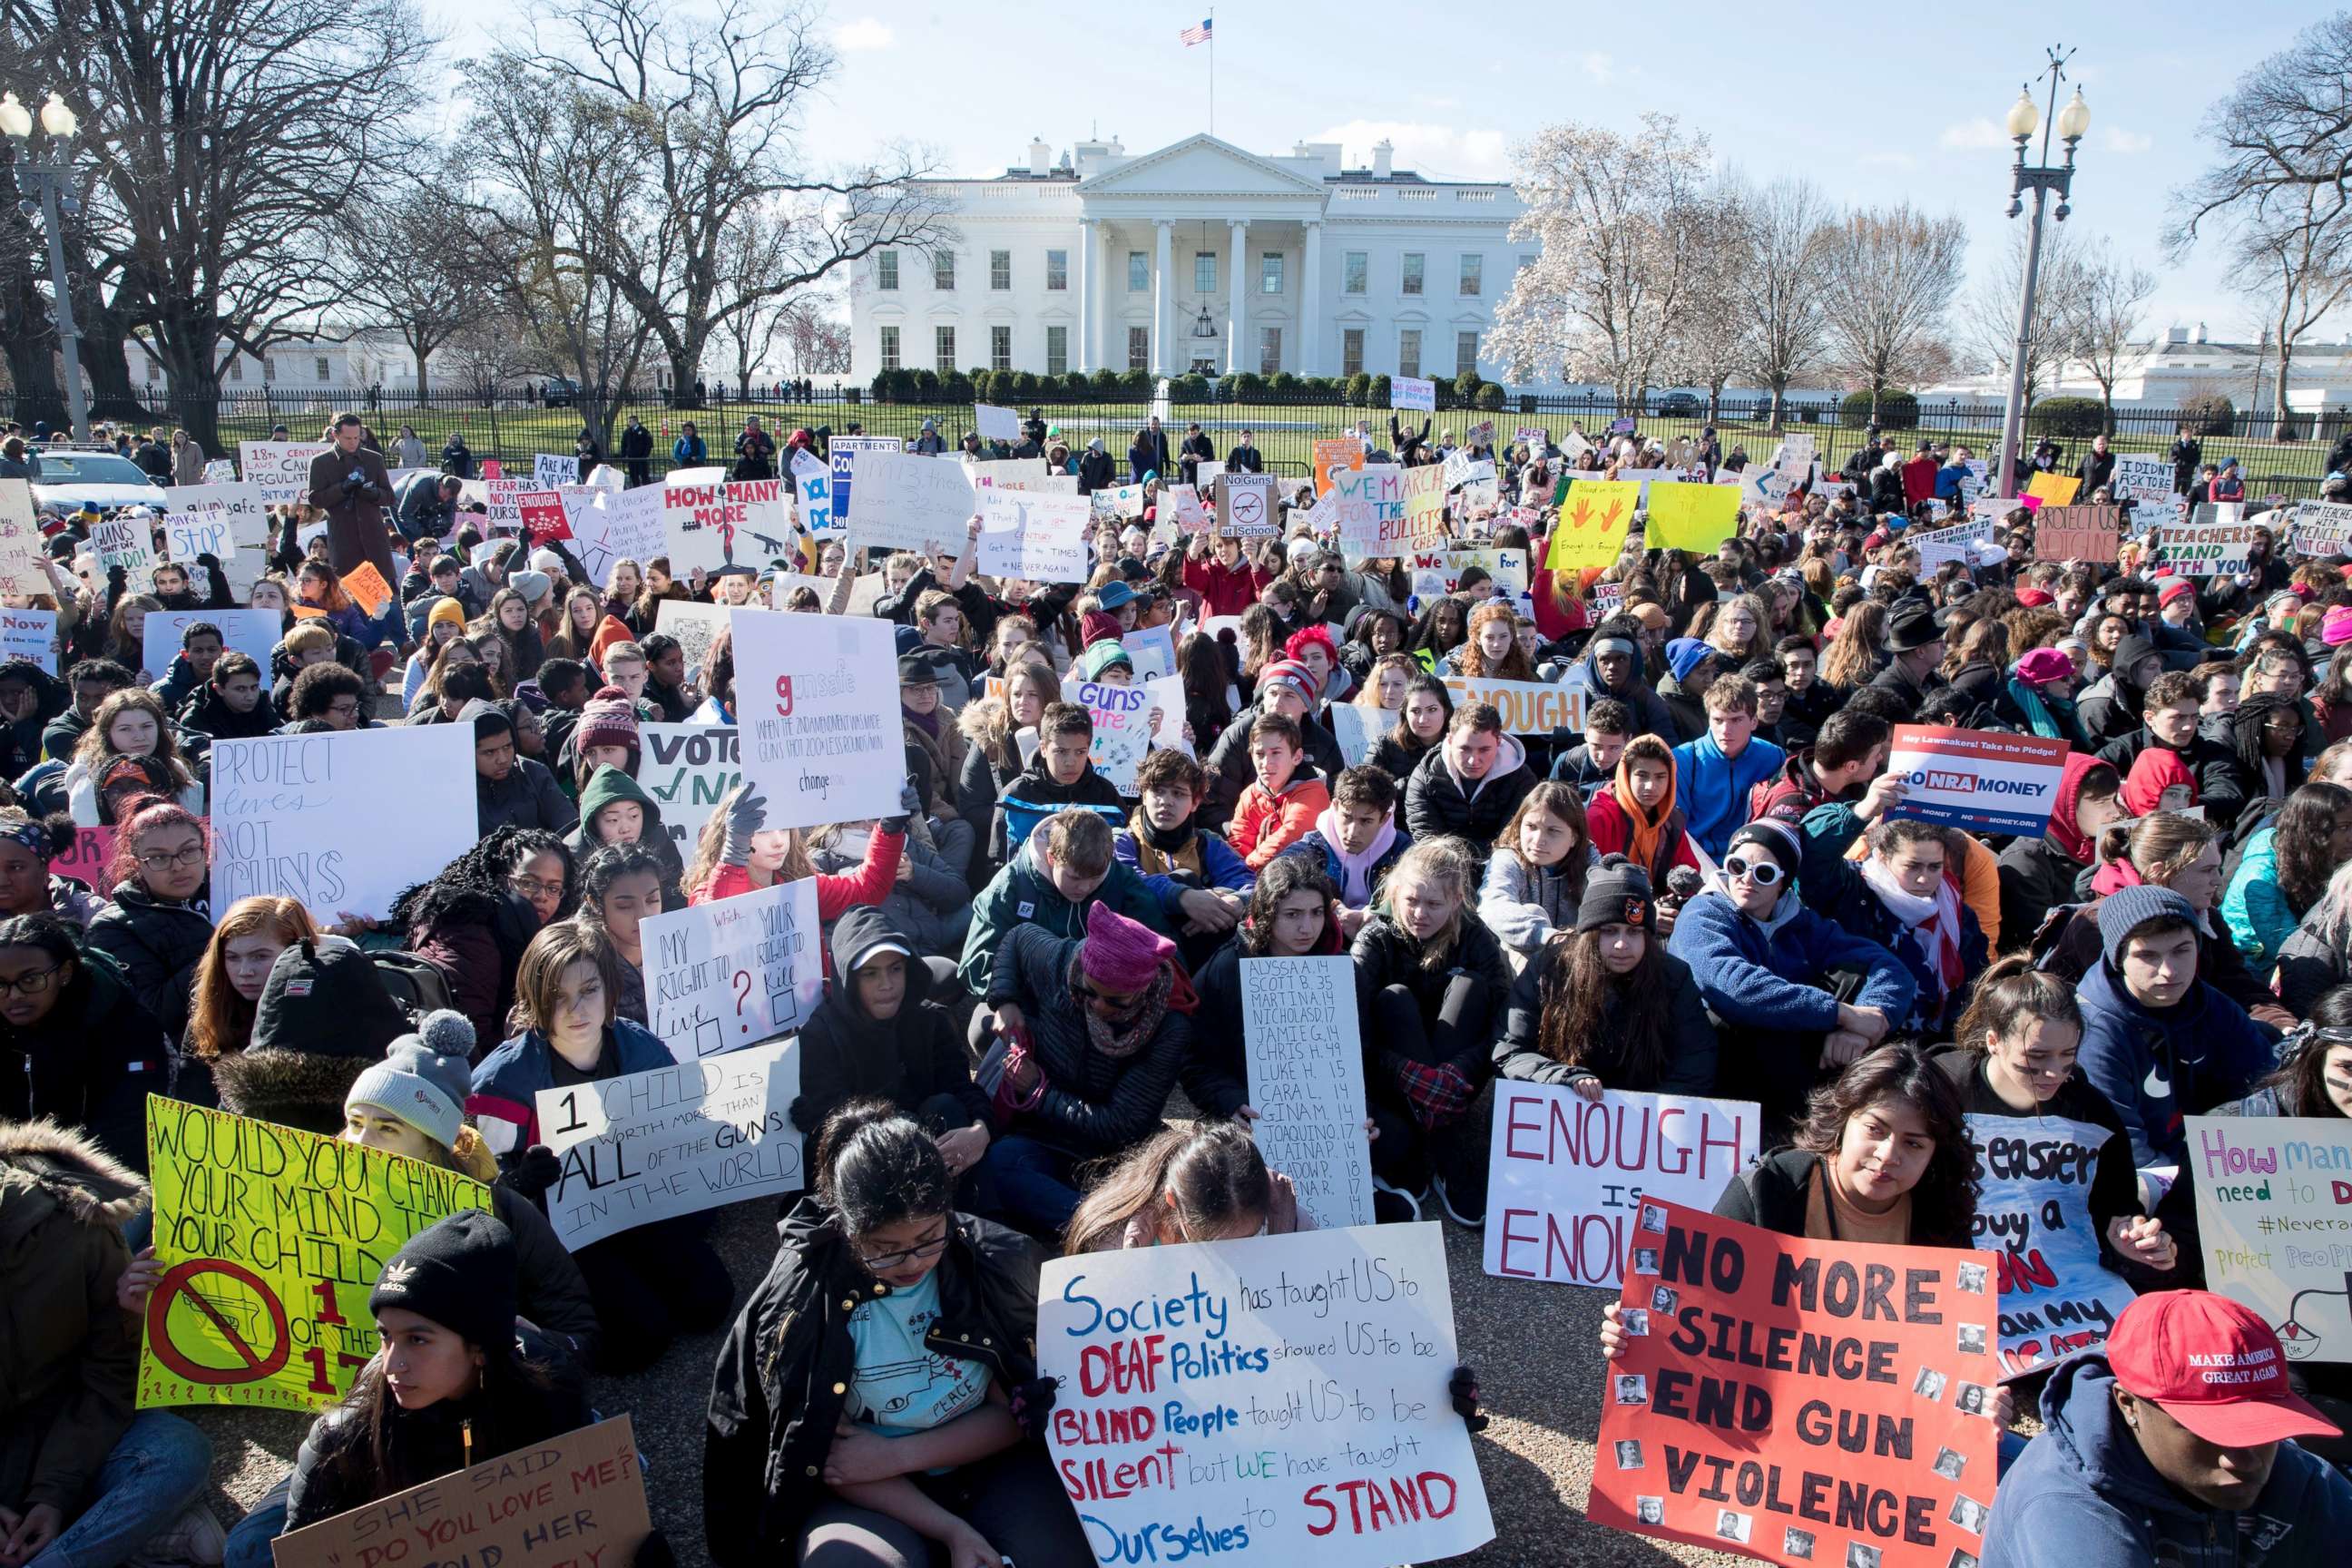 PHOTO: Young people participate in the National School Walkout over gun violence at a rally on Pennsylvania Avenue outside the White House in Washington, D.C., March 14, 2018.